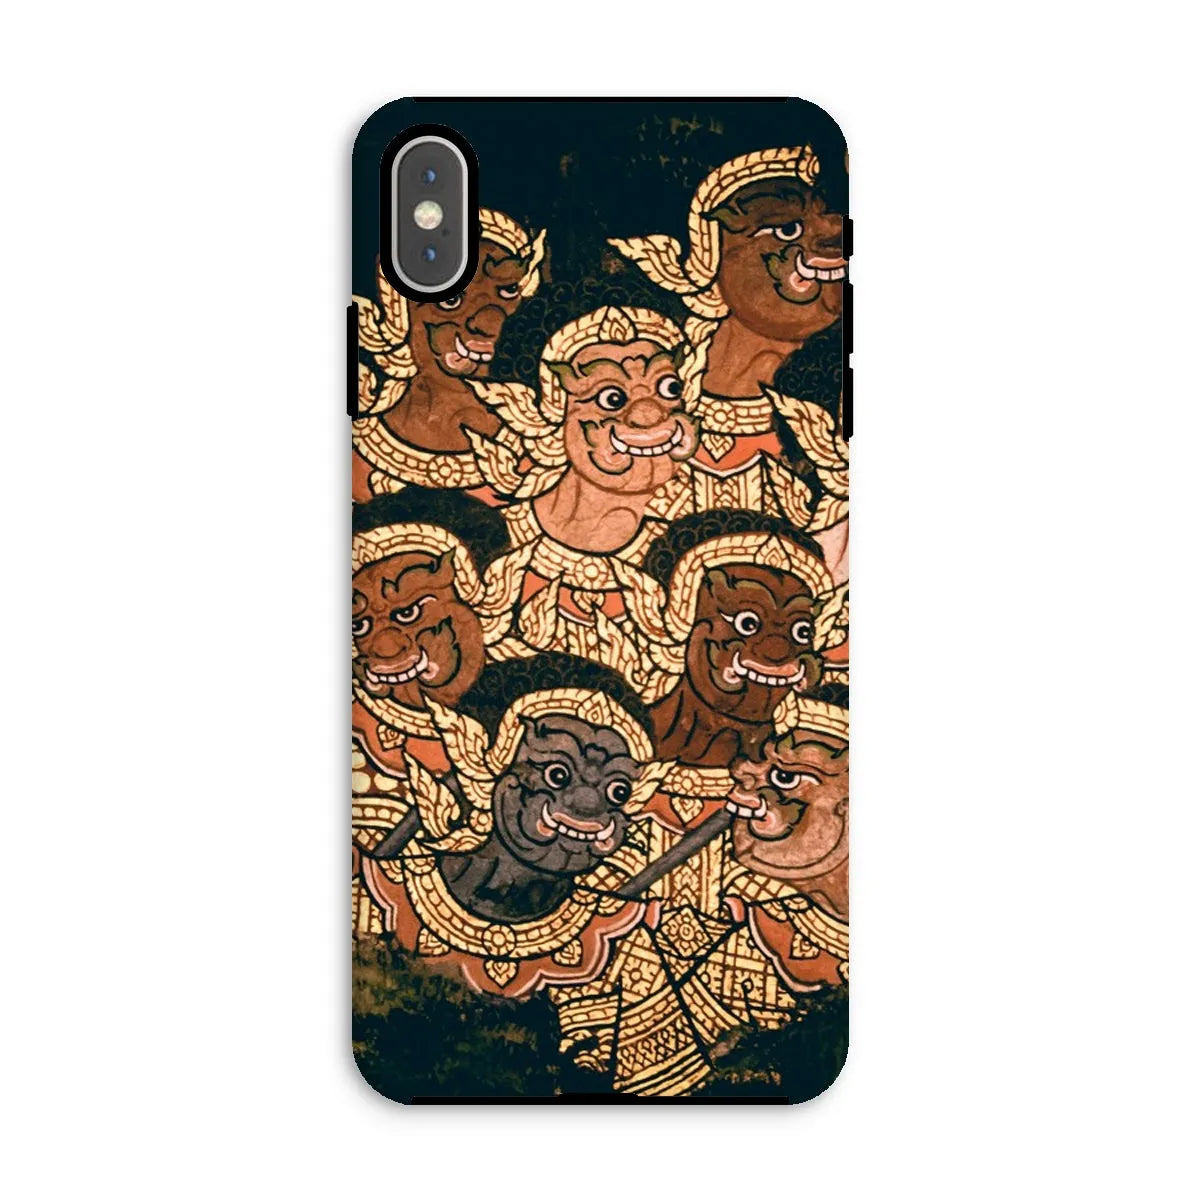 Babes In The Woods - Thailand Aesthetic Art Phone Case - Iphone Xs Max / Matte - Mobile Phone Cases - Aesthetic Art